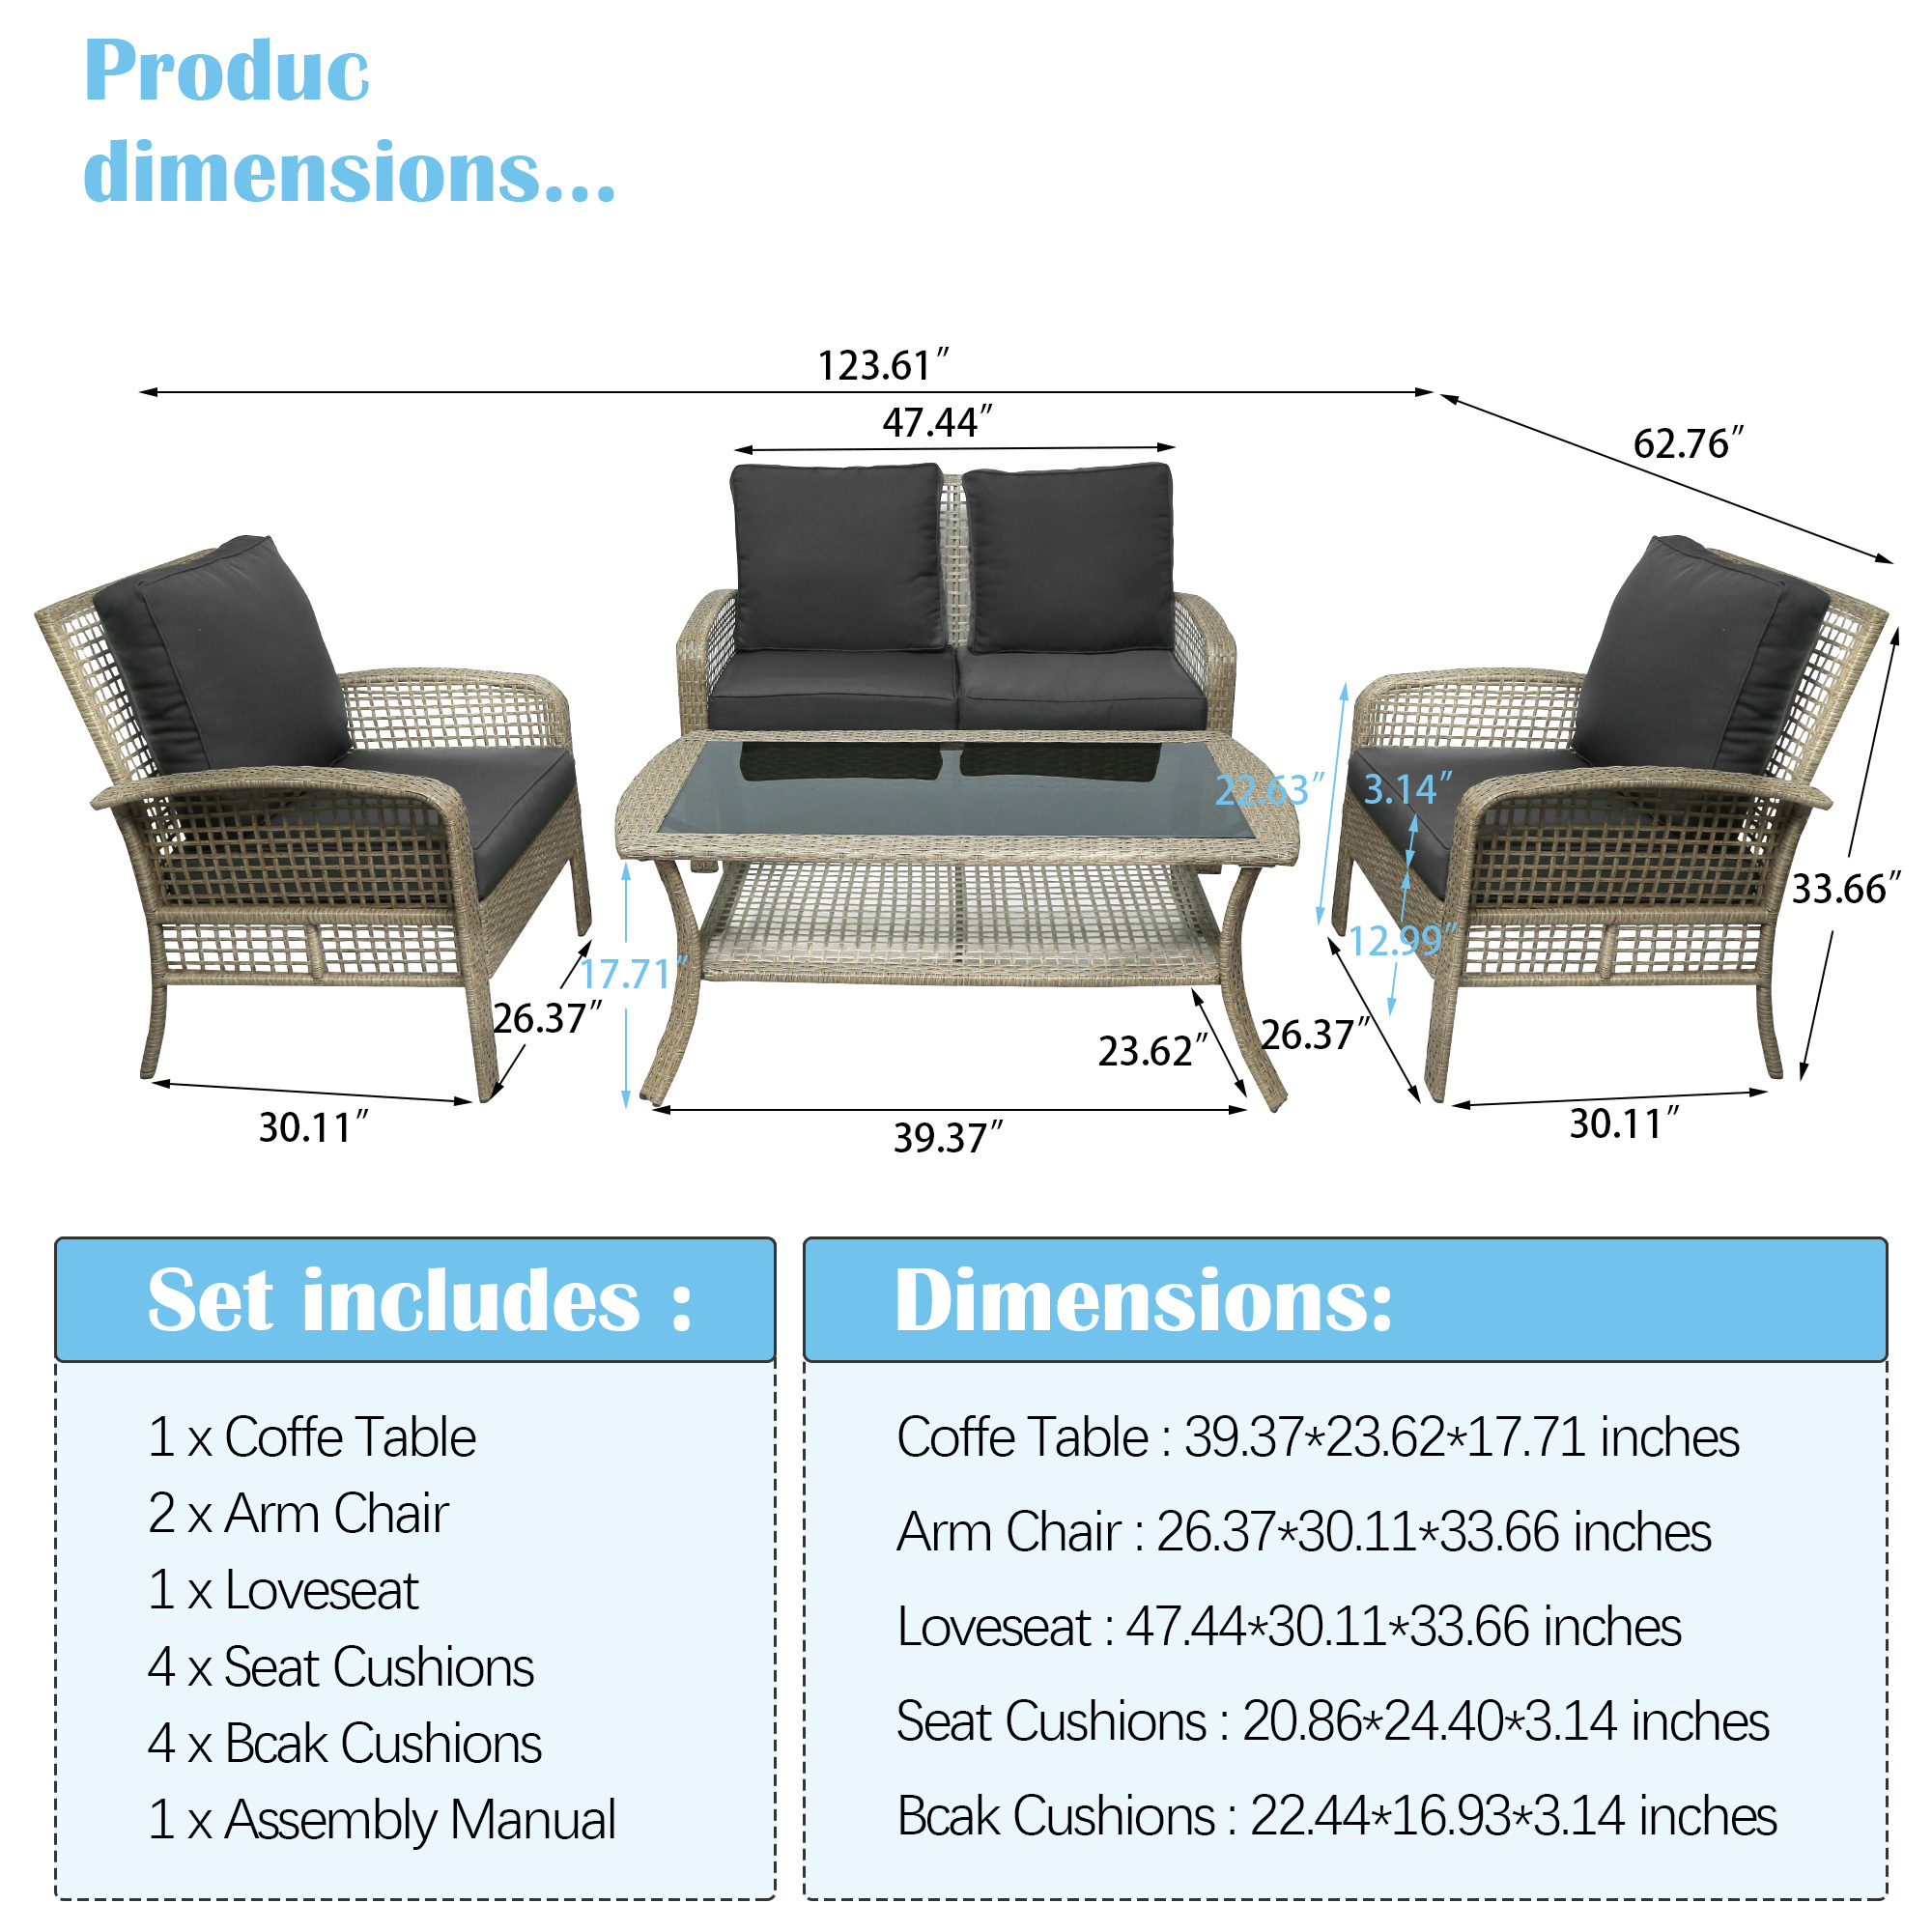 SEGMART Outdoor 4 Pieces Patio Furniture Sets with Glass Table, Wicker Chair Conversation Set for Outside, Deck Patio Furniture Sets with Cushion for Garden Poolside, Grey, SS2168 - image 3 of 8